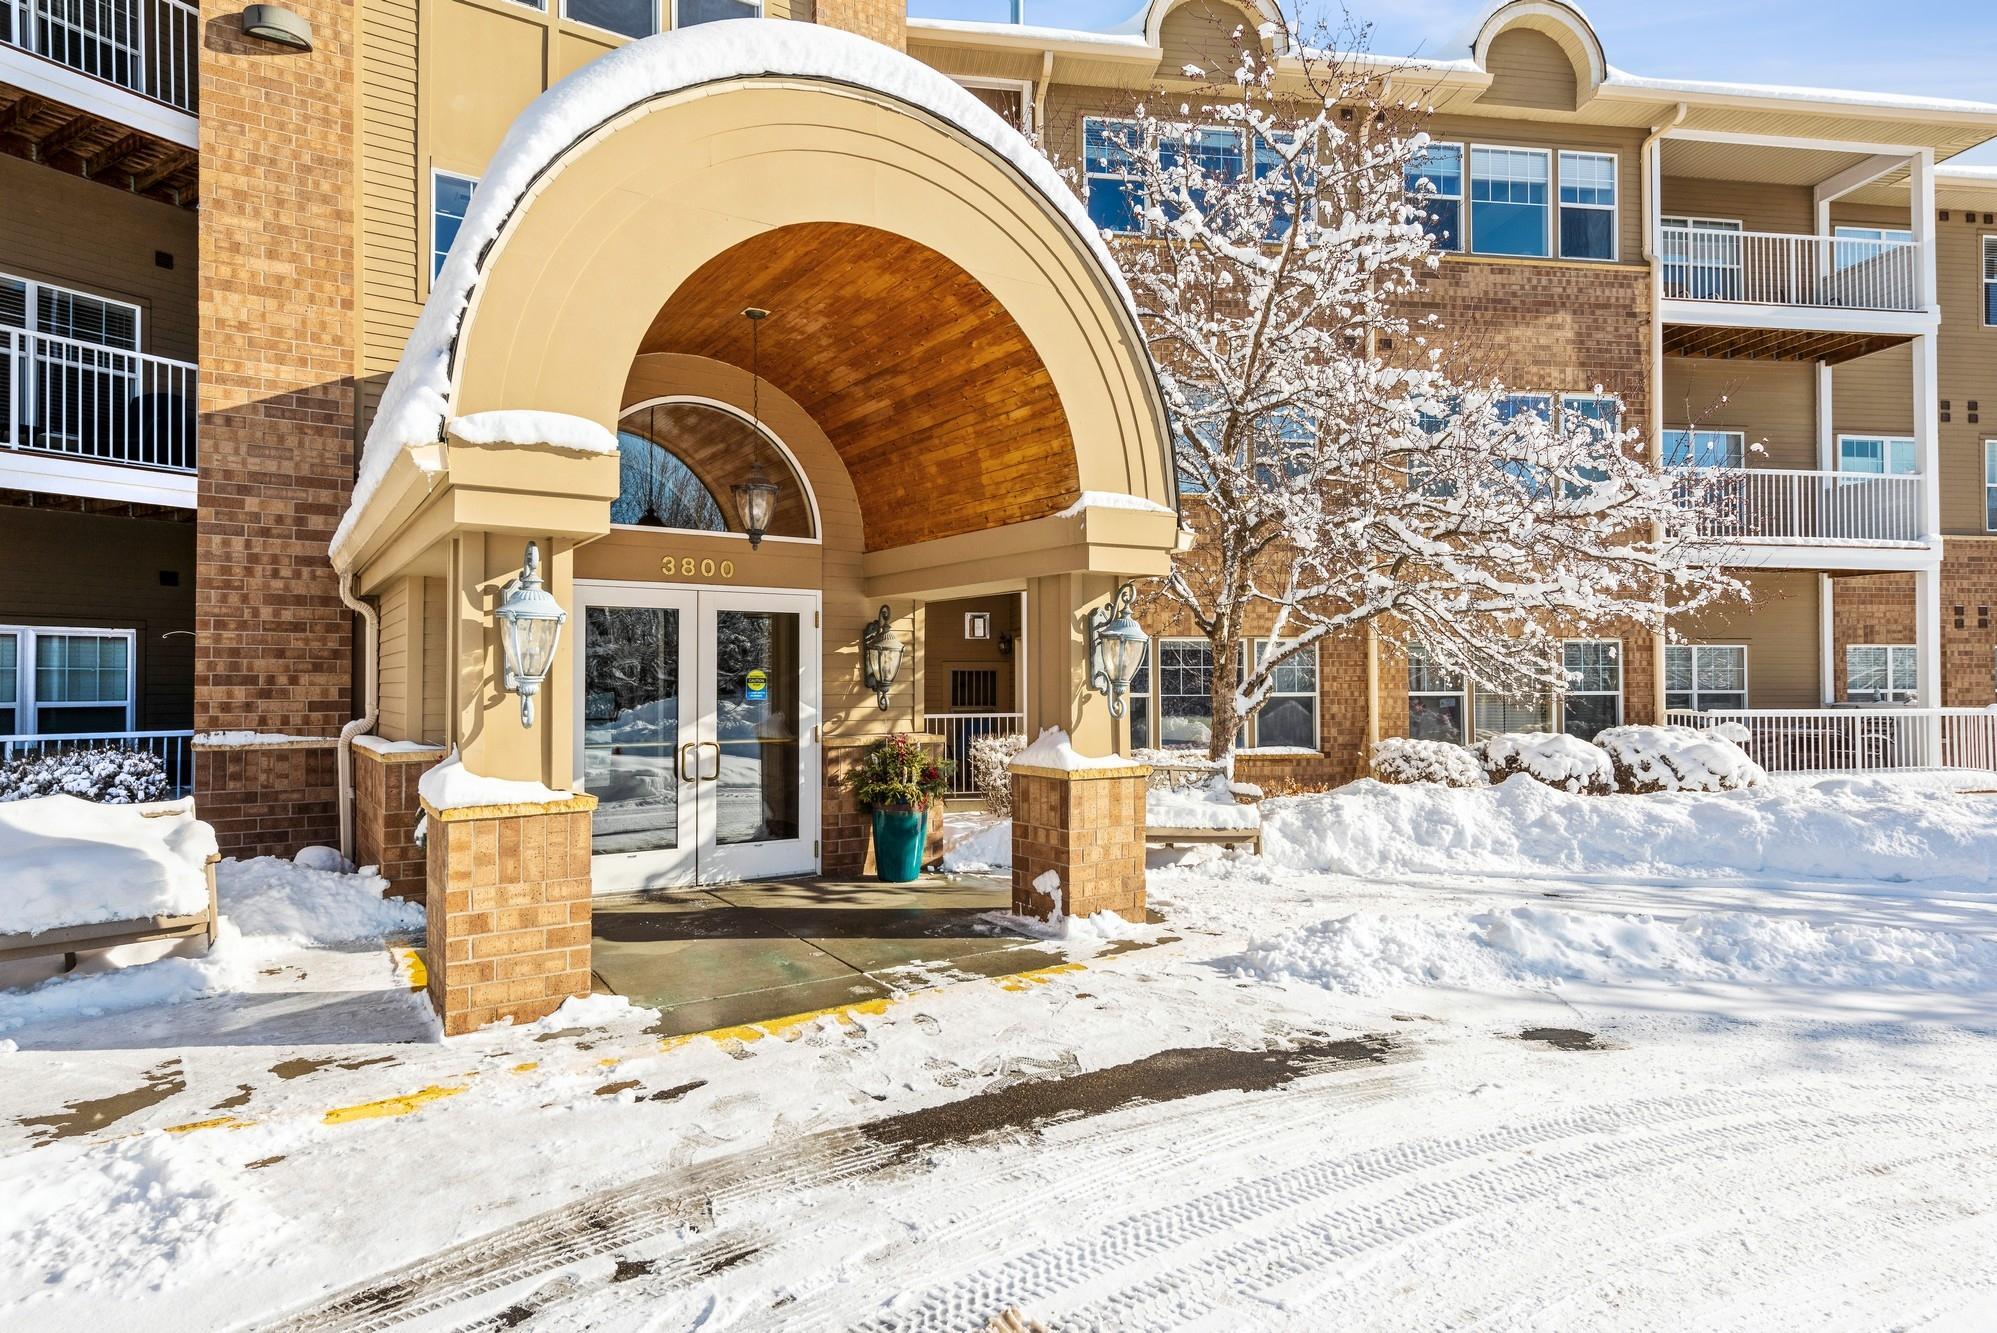 Well maintained 55+ building steps to Edinburgh golf course with great amenities including community room, guest suite, library, craft room, wood work shop and fitness room.